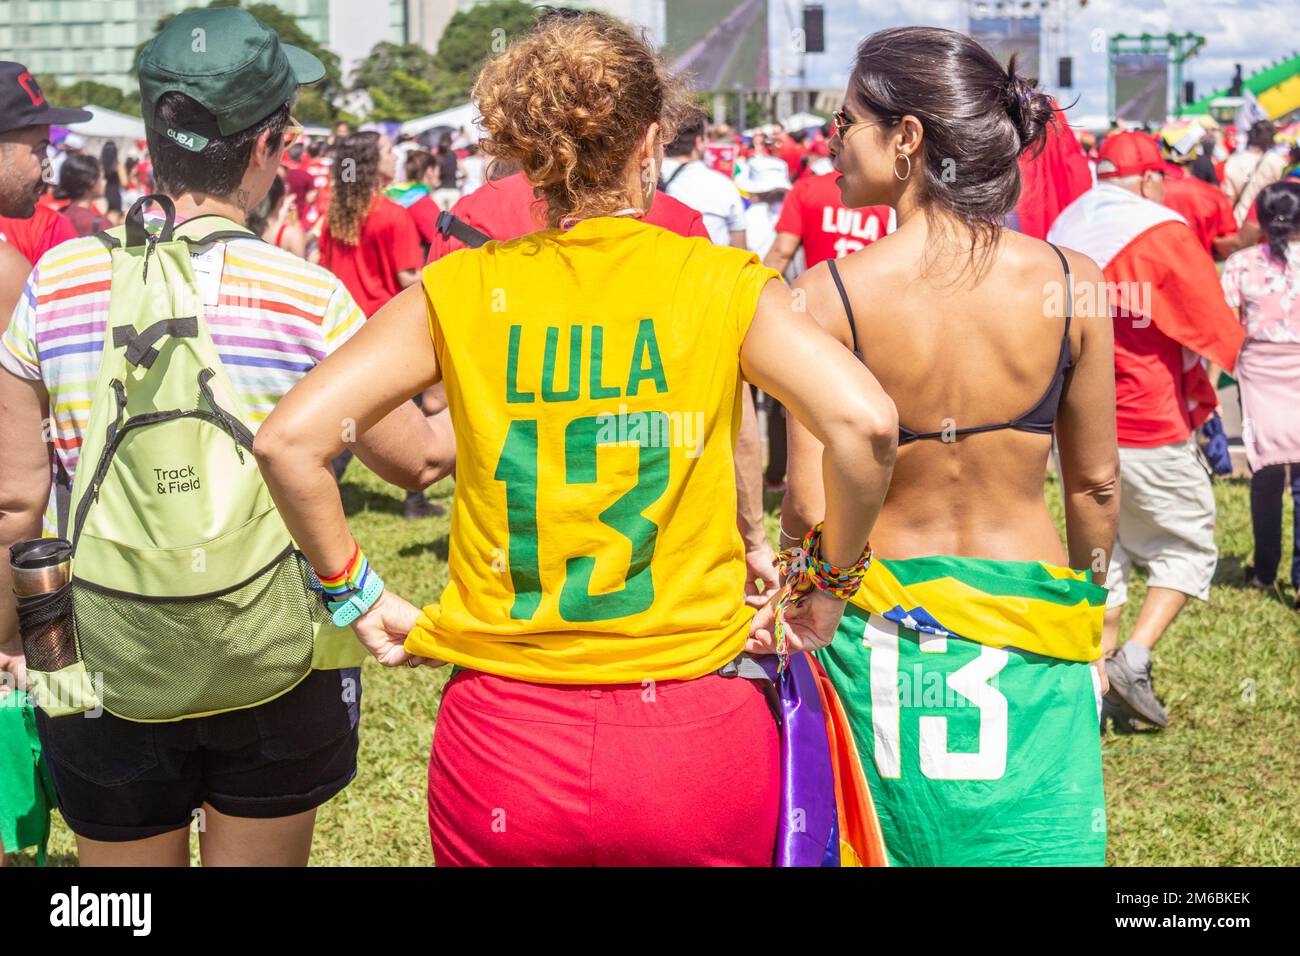 Brasília, DF, Brazil – January 01, 2023: Two women walking in shirts with the number 13 on them. Photo taken at the inauguration event. Stock Photo